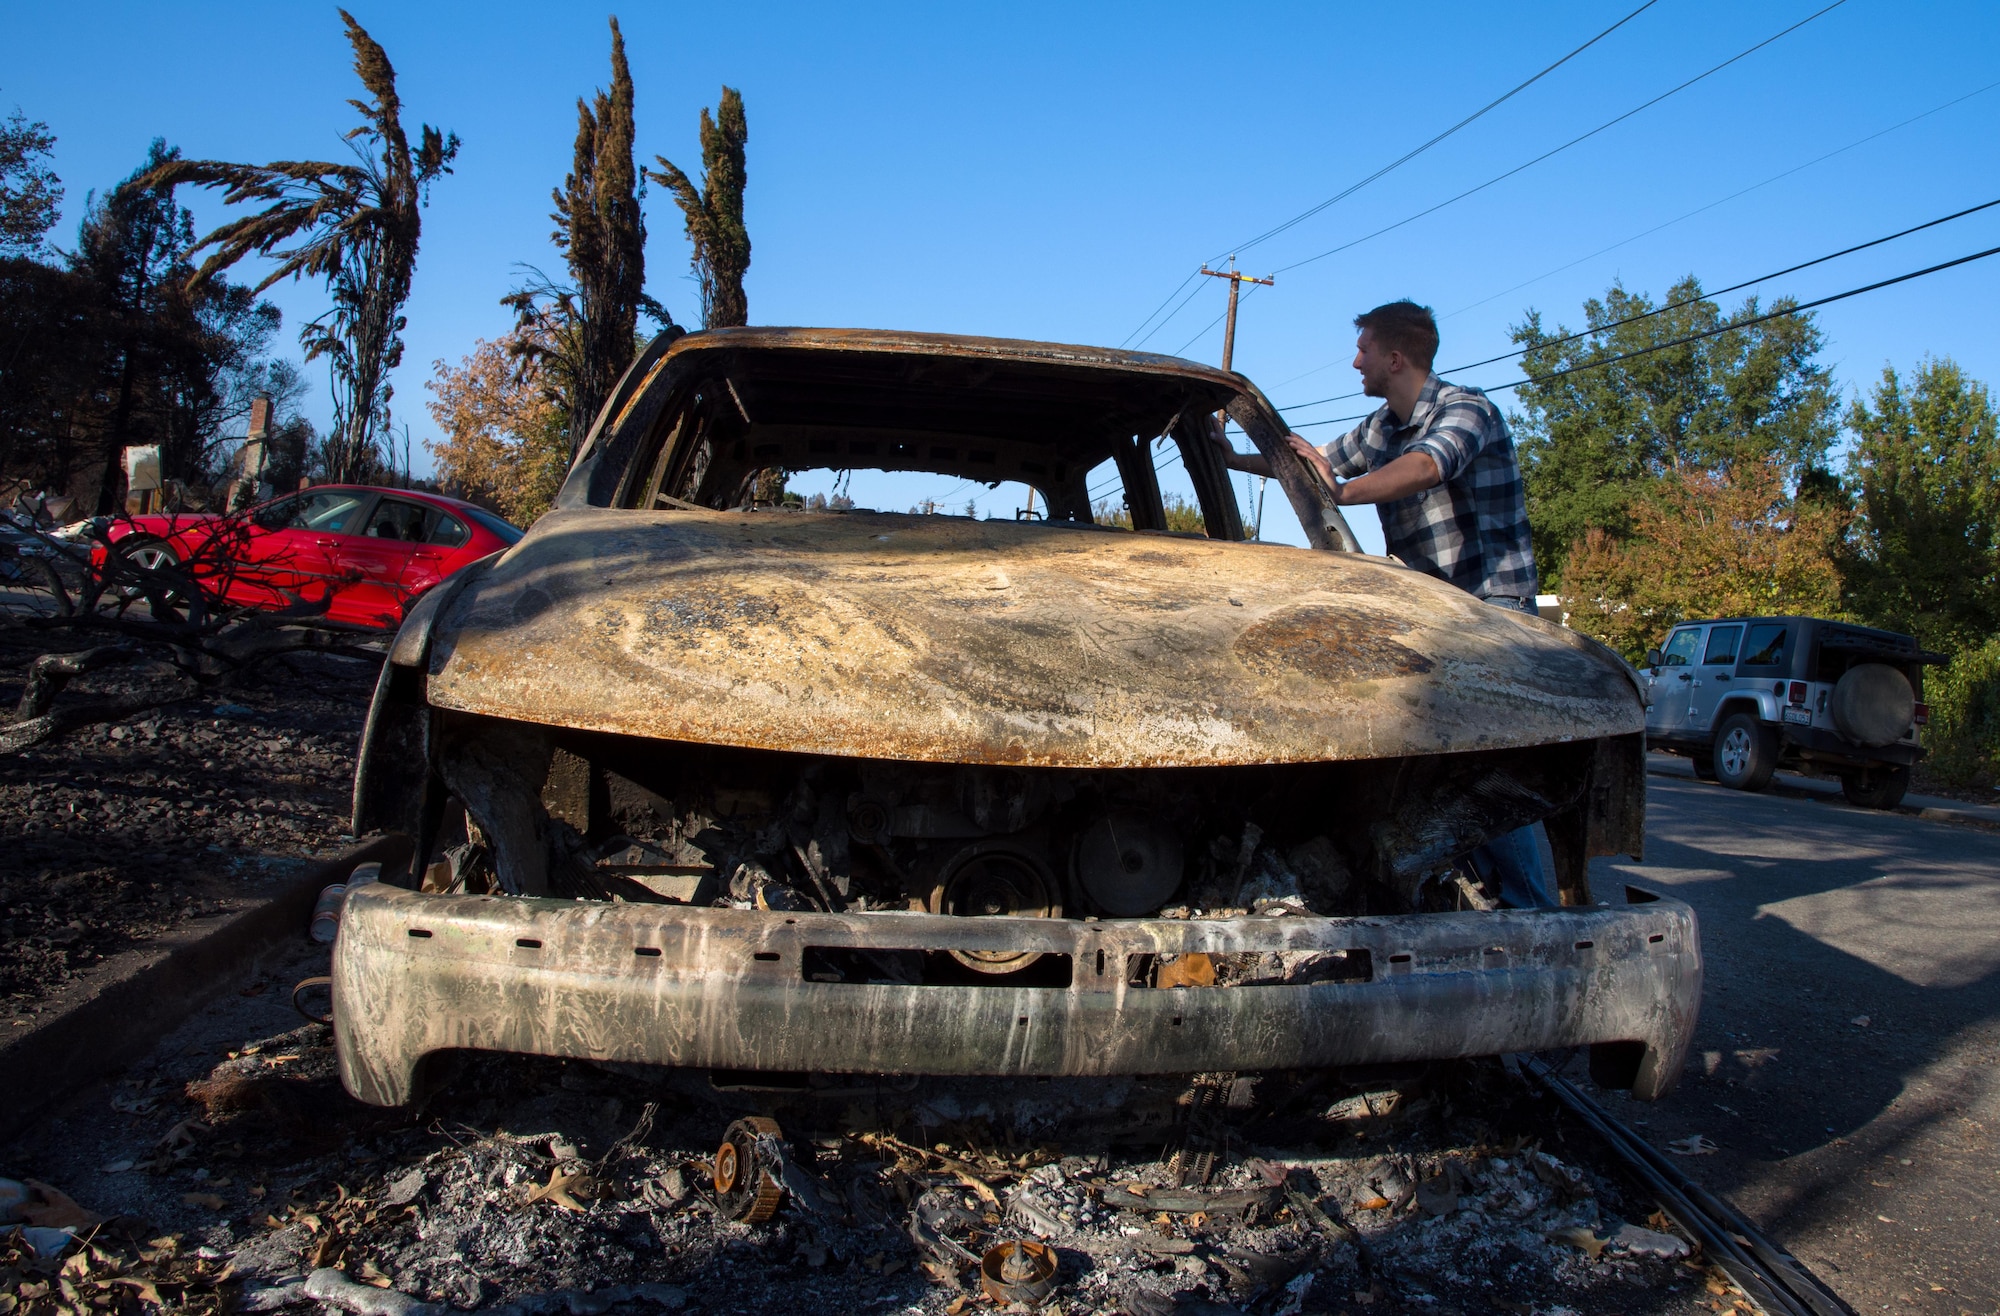 Senior Airman Martin Baglien, 349th Civil Engineer Squadron firefighter, inspects the shell of his father-in-law’s car after the California wildfire in Santa Rosa, Calif., on Oct. 31, 2017. Baglien was woken up by his family in the early hours of the morning after the wildfires started.